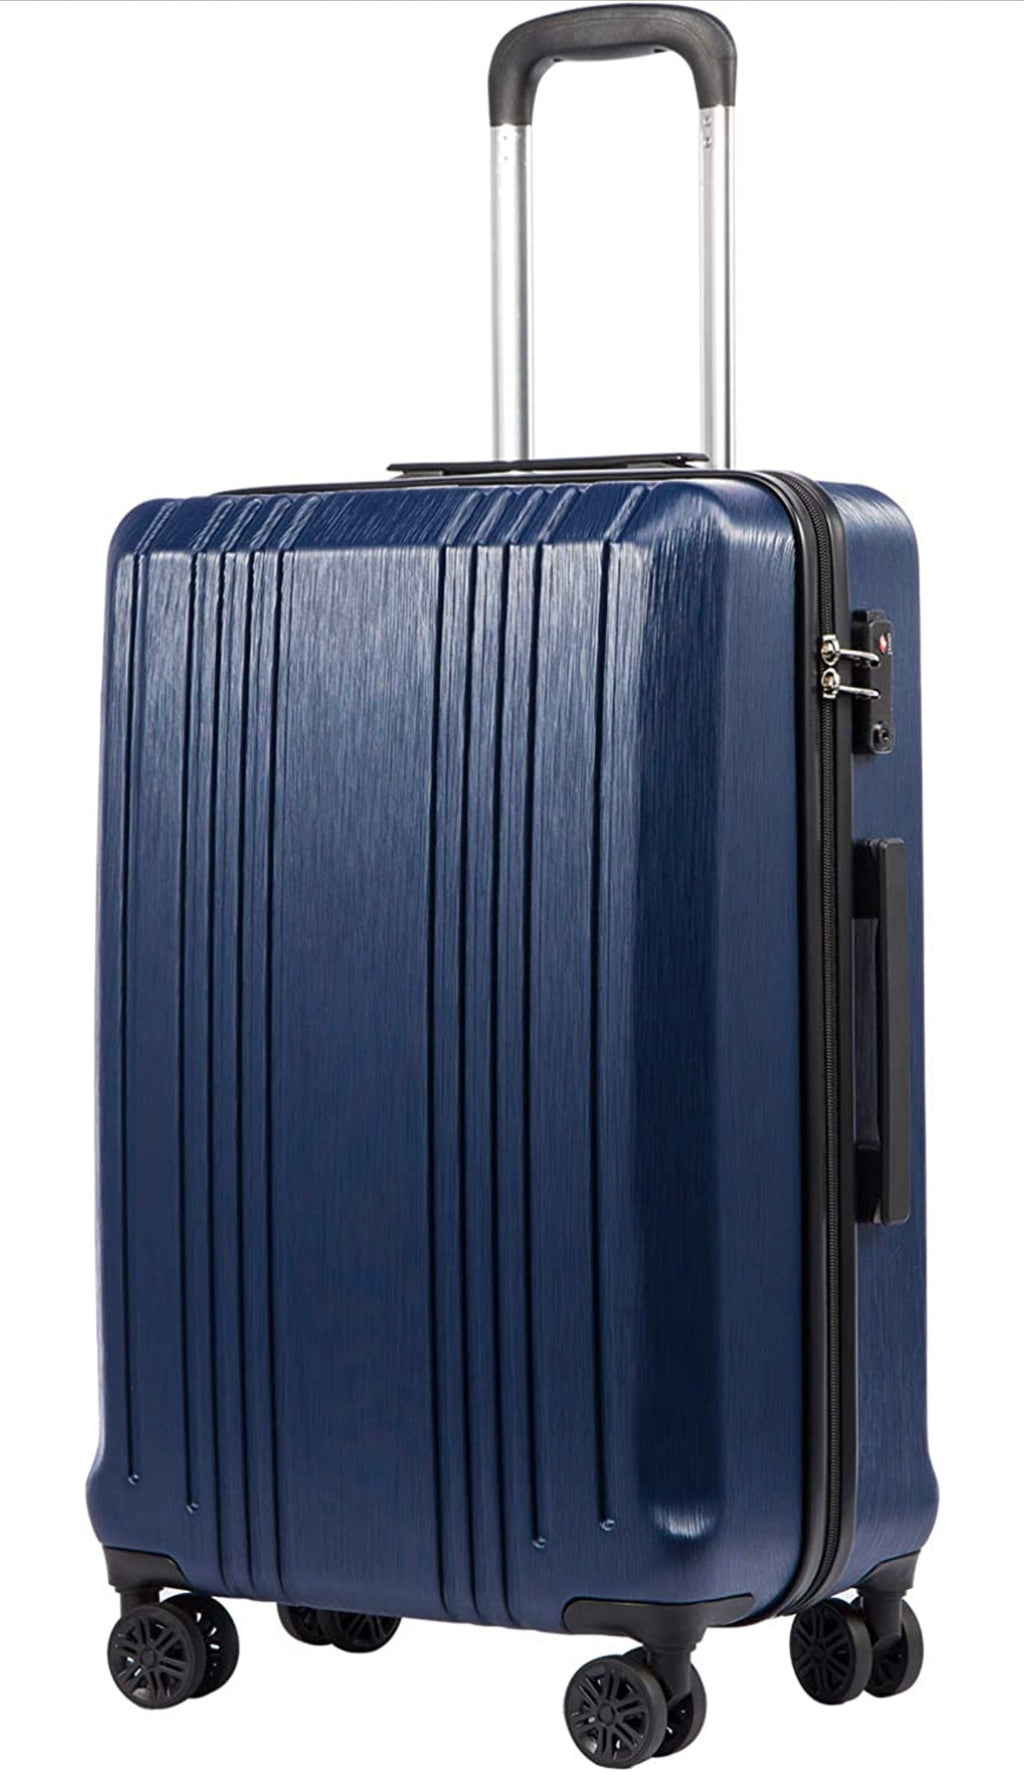 https://cdn.shopify.com/s/files/1/0351/4656/3724/products/large-luggage-expandable-suitcase-pcabs-with-tsa-lock-spinner-20in24in28in-navy-l28-223888_1024x.jpg?v=1685420093